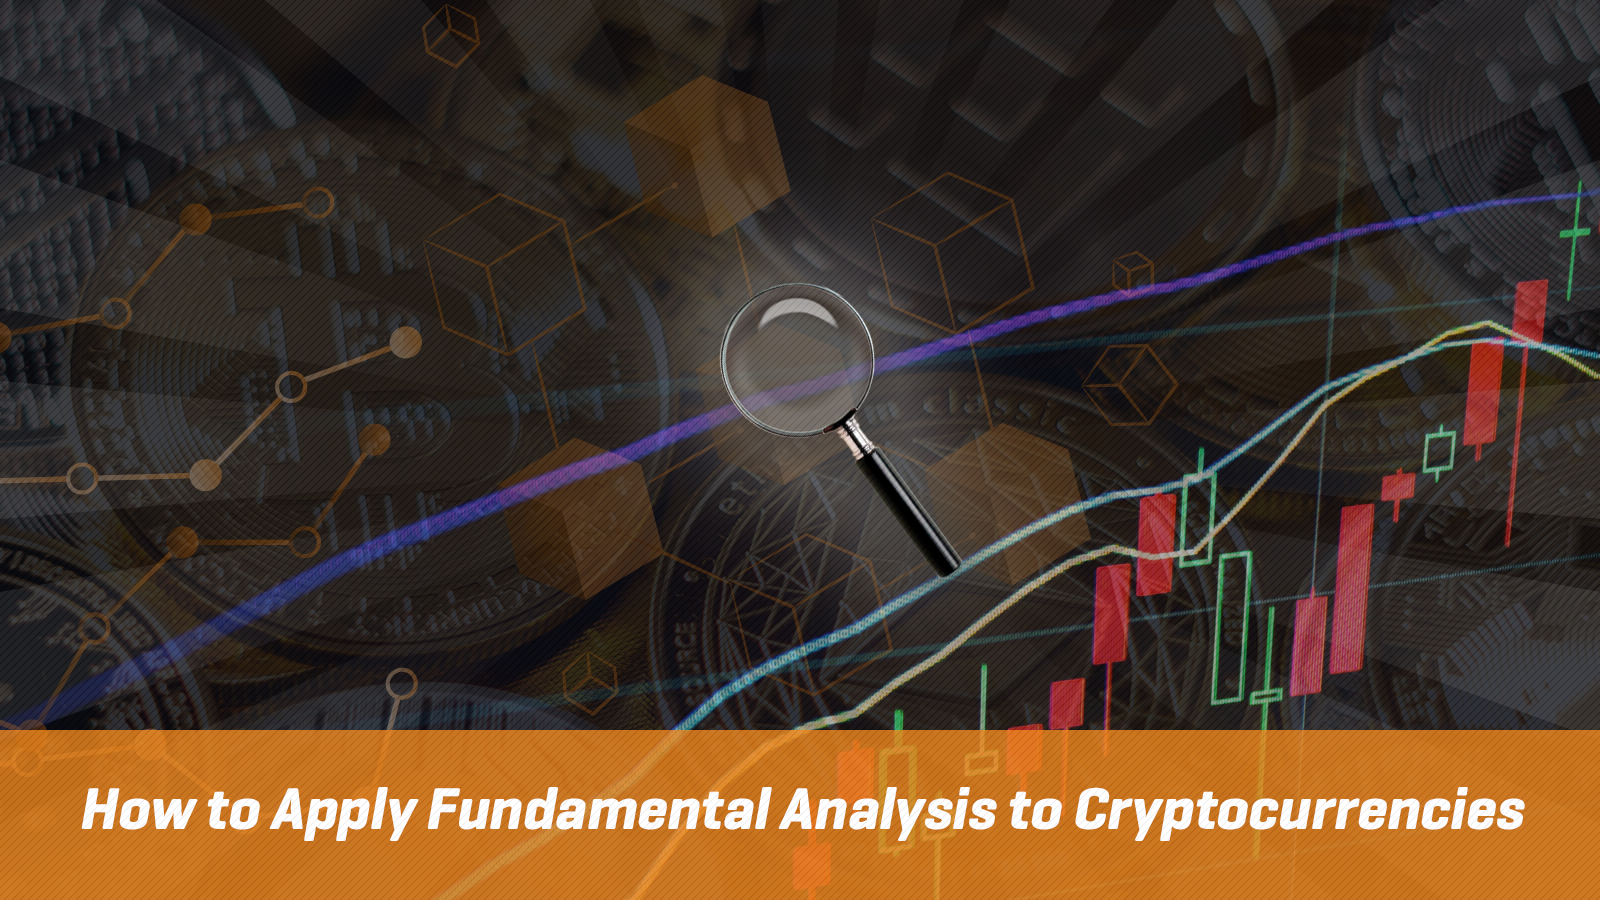 Fundamental Analysis for Cryptocurrencies